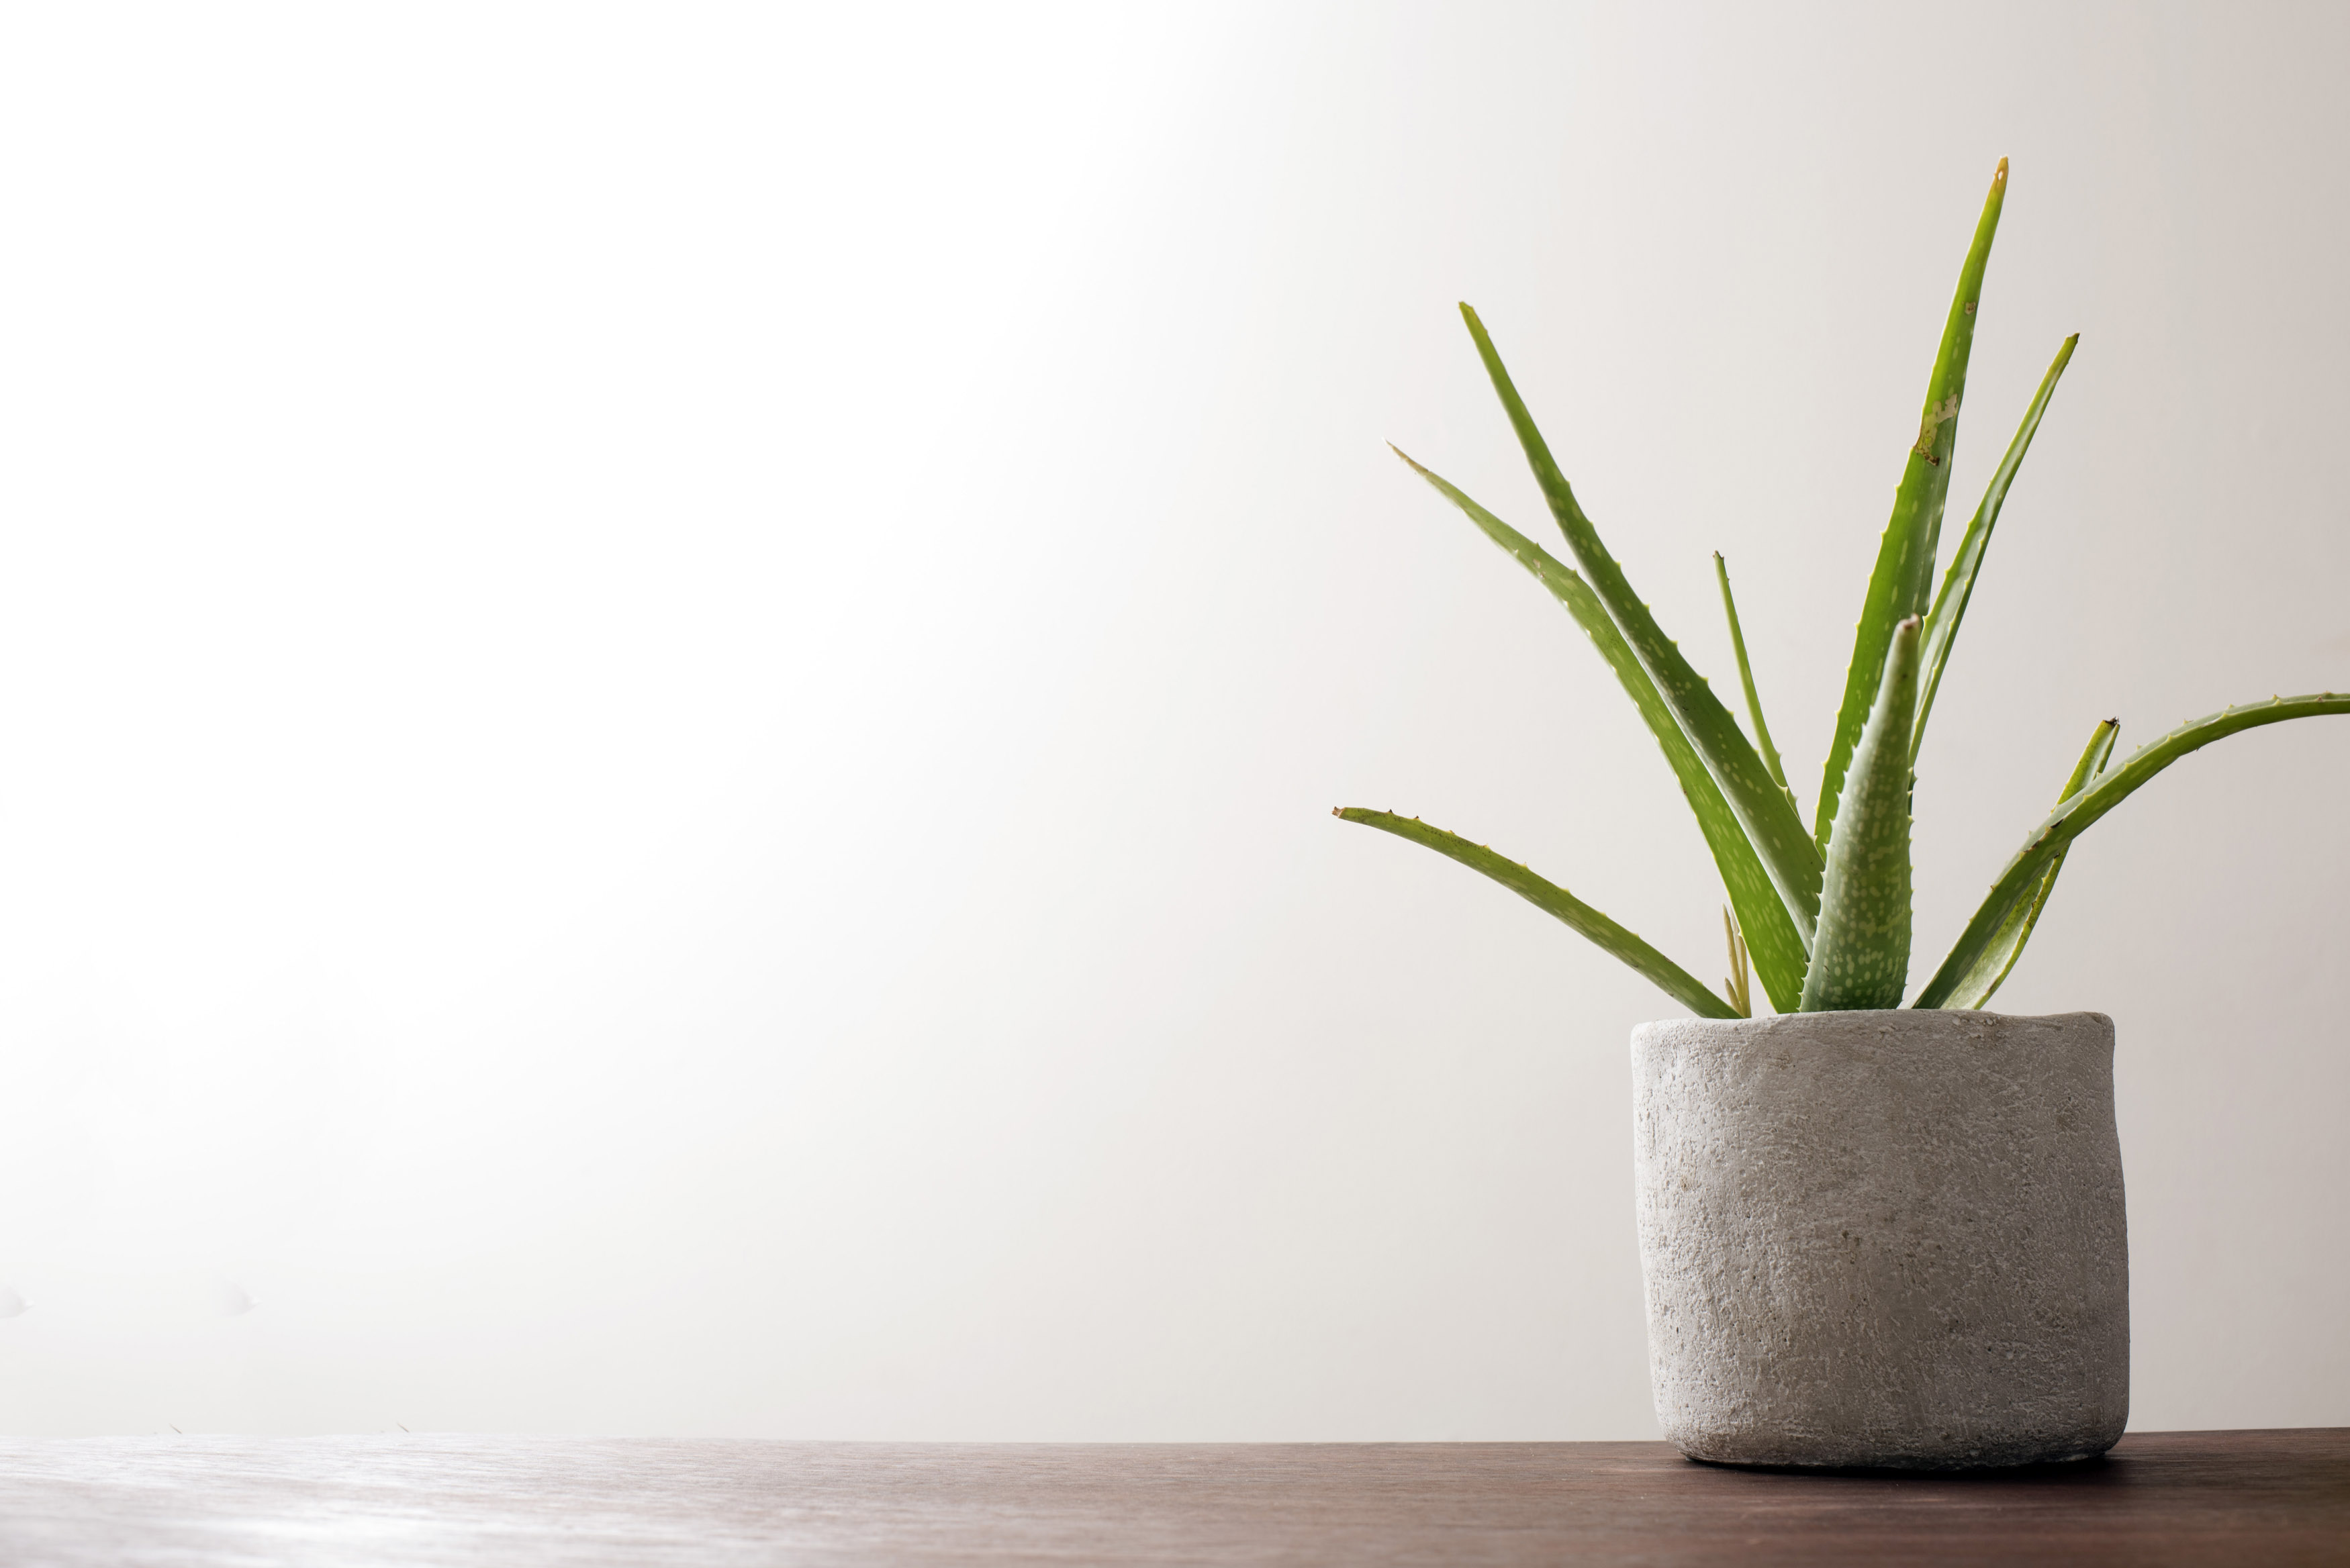 Free image of Potted aloe vera plant on a wooden table